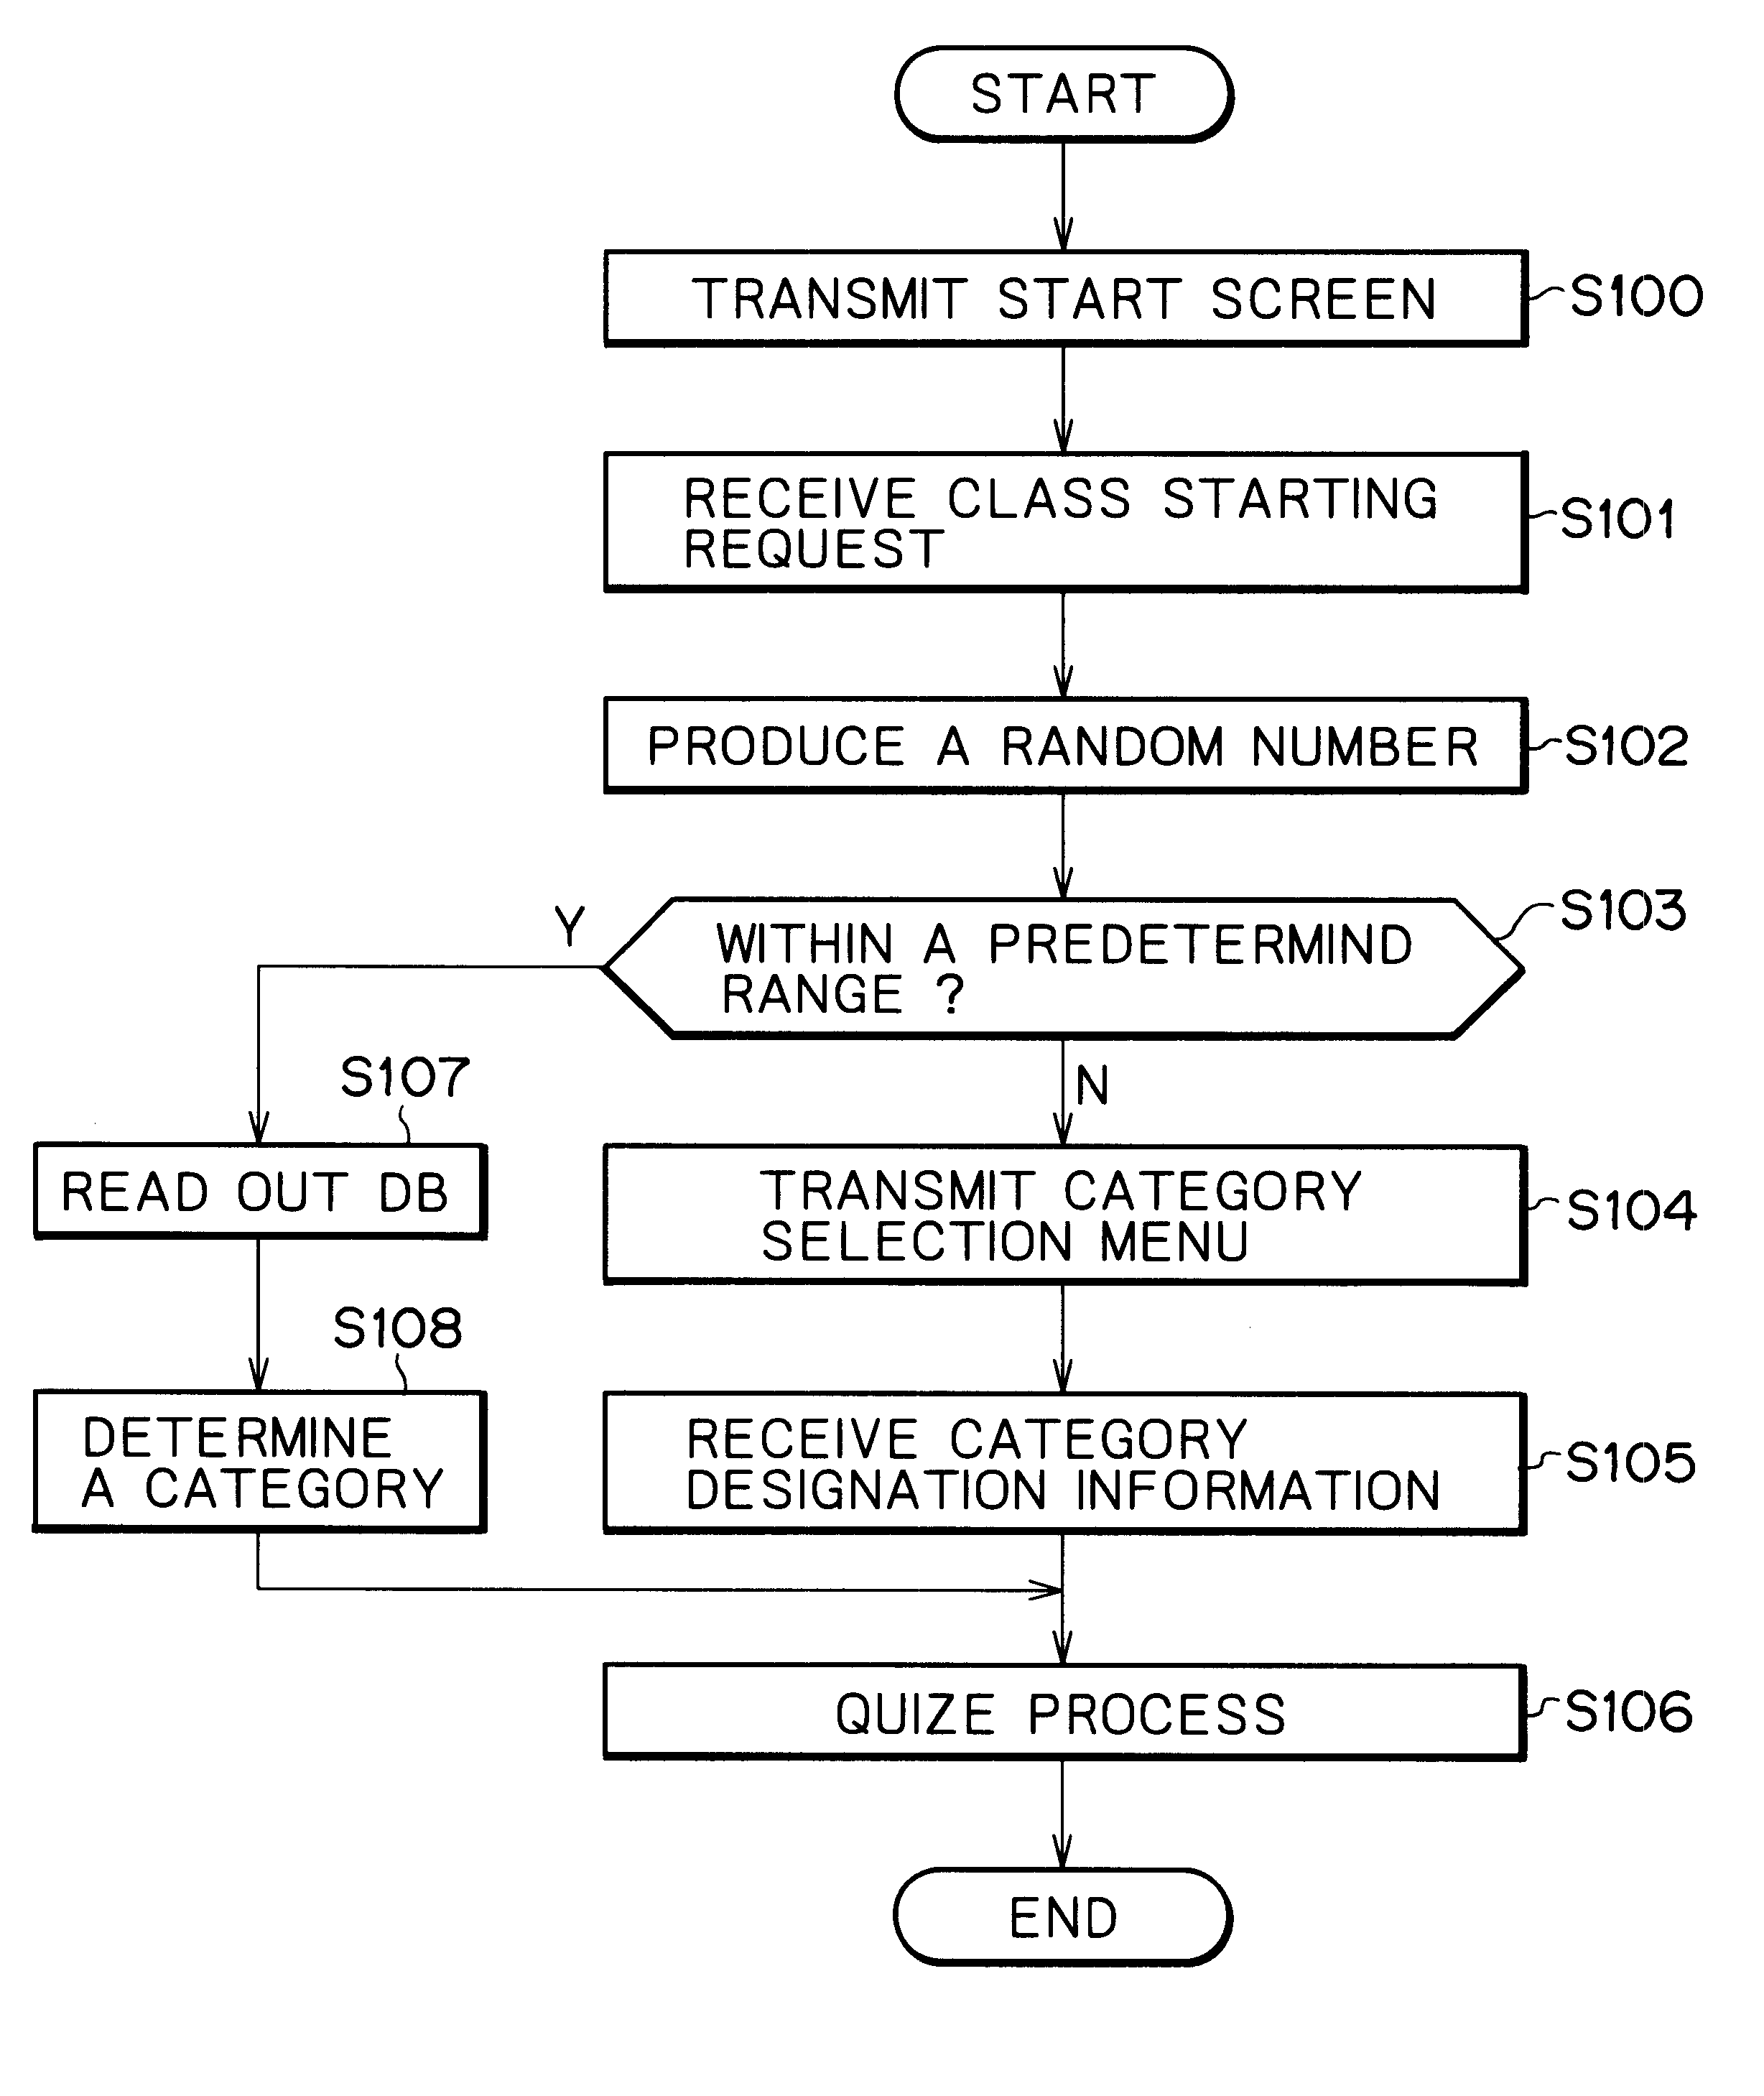 Game service provision device and method